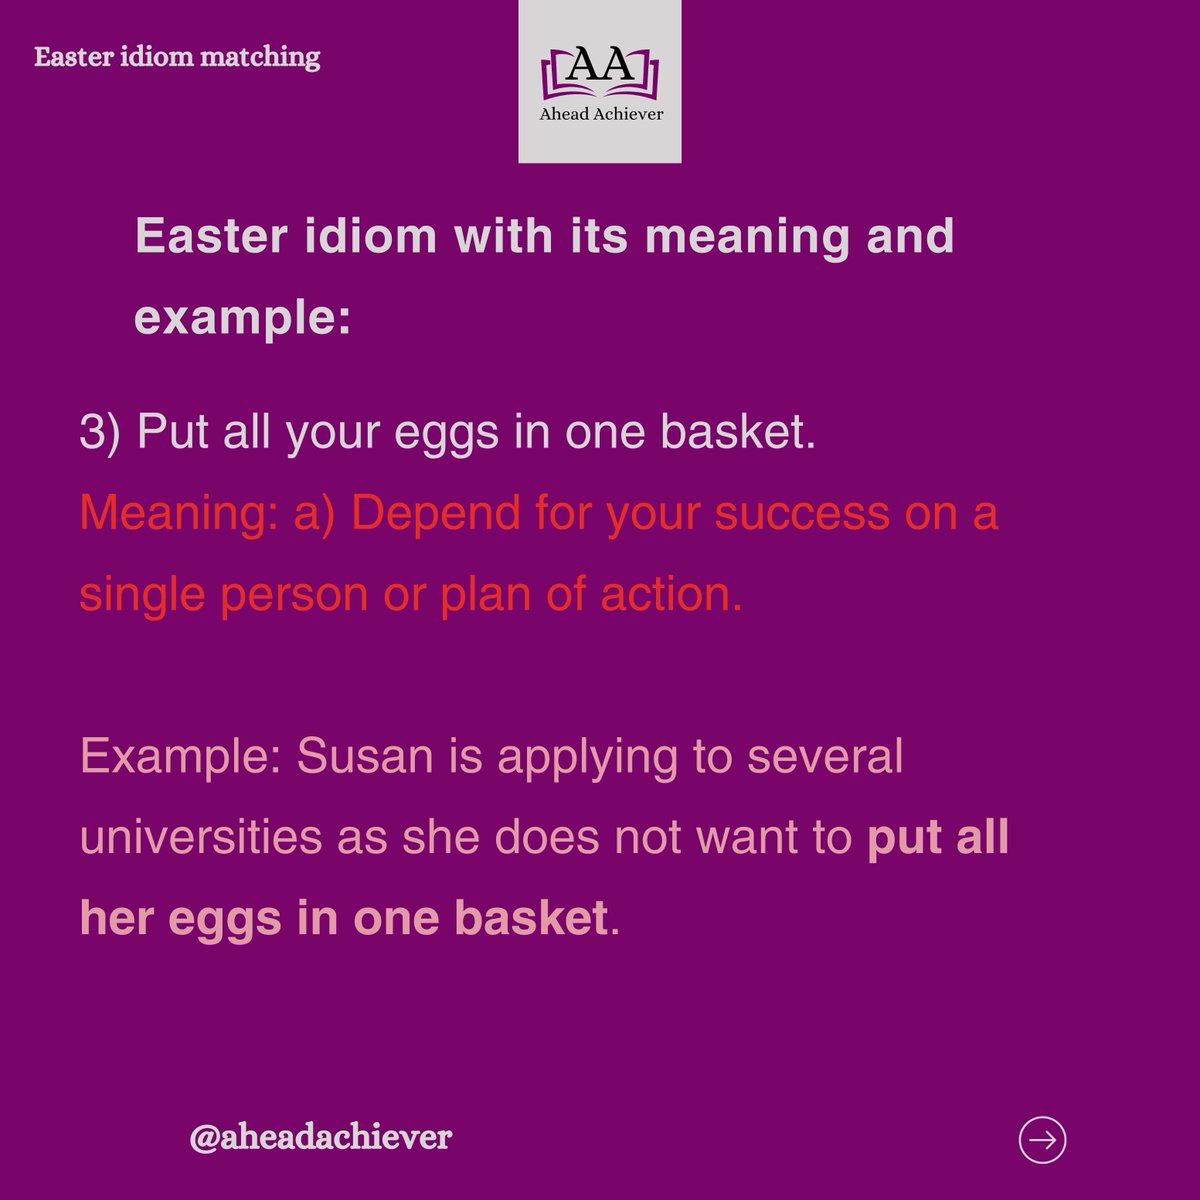 Ready to hop into some Easter fun? Let’s hunt for some idiomatic treasures. Test your knowledge and get into the holiday spirit with this egg-citing challenge.

#AheadAchiever #EducationConsultant #Education #Masters #StudyinUK #Turnitin #IELTS #HappyEaster #Easter #Idioms #fun